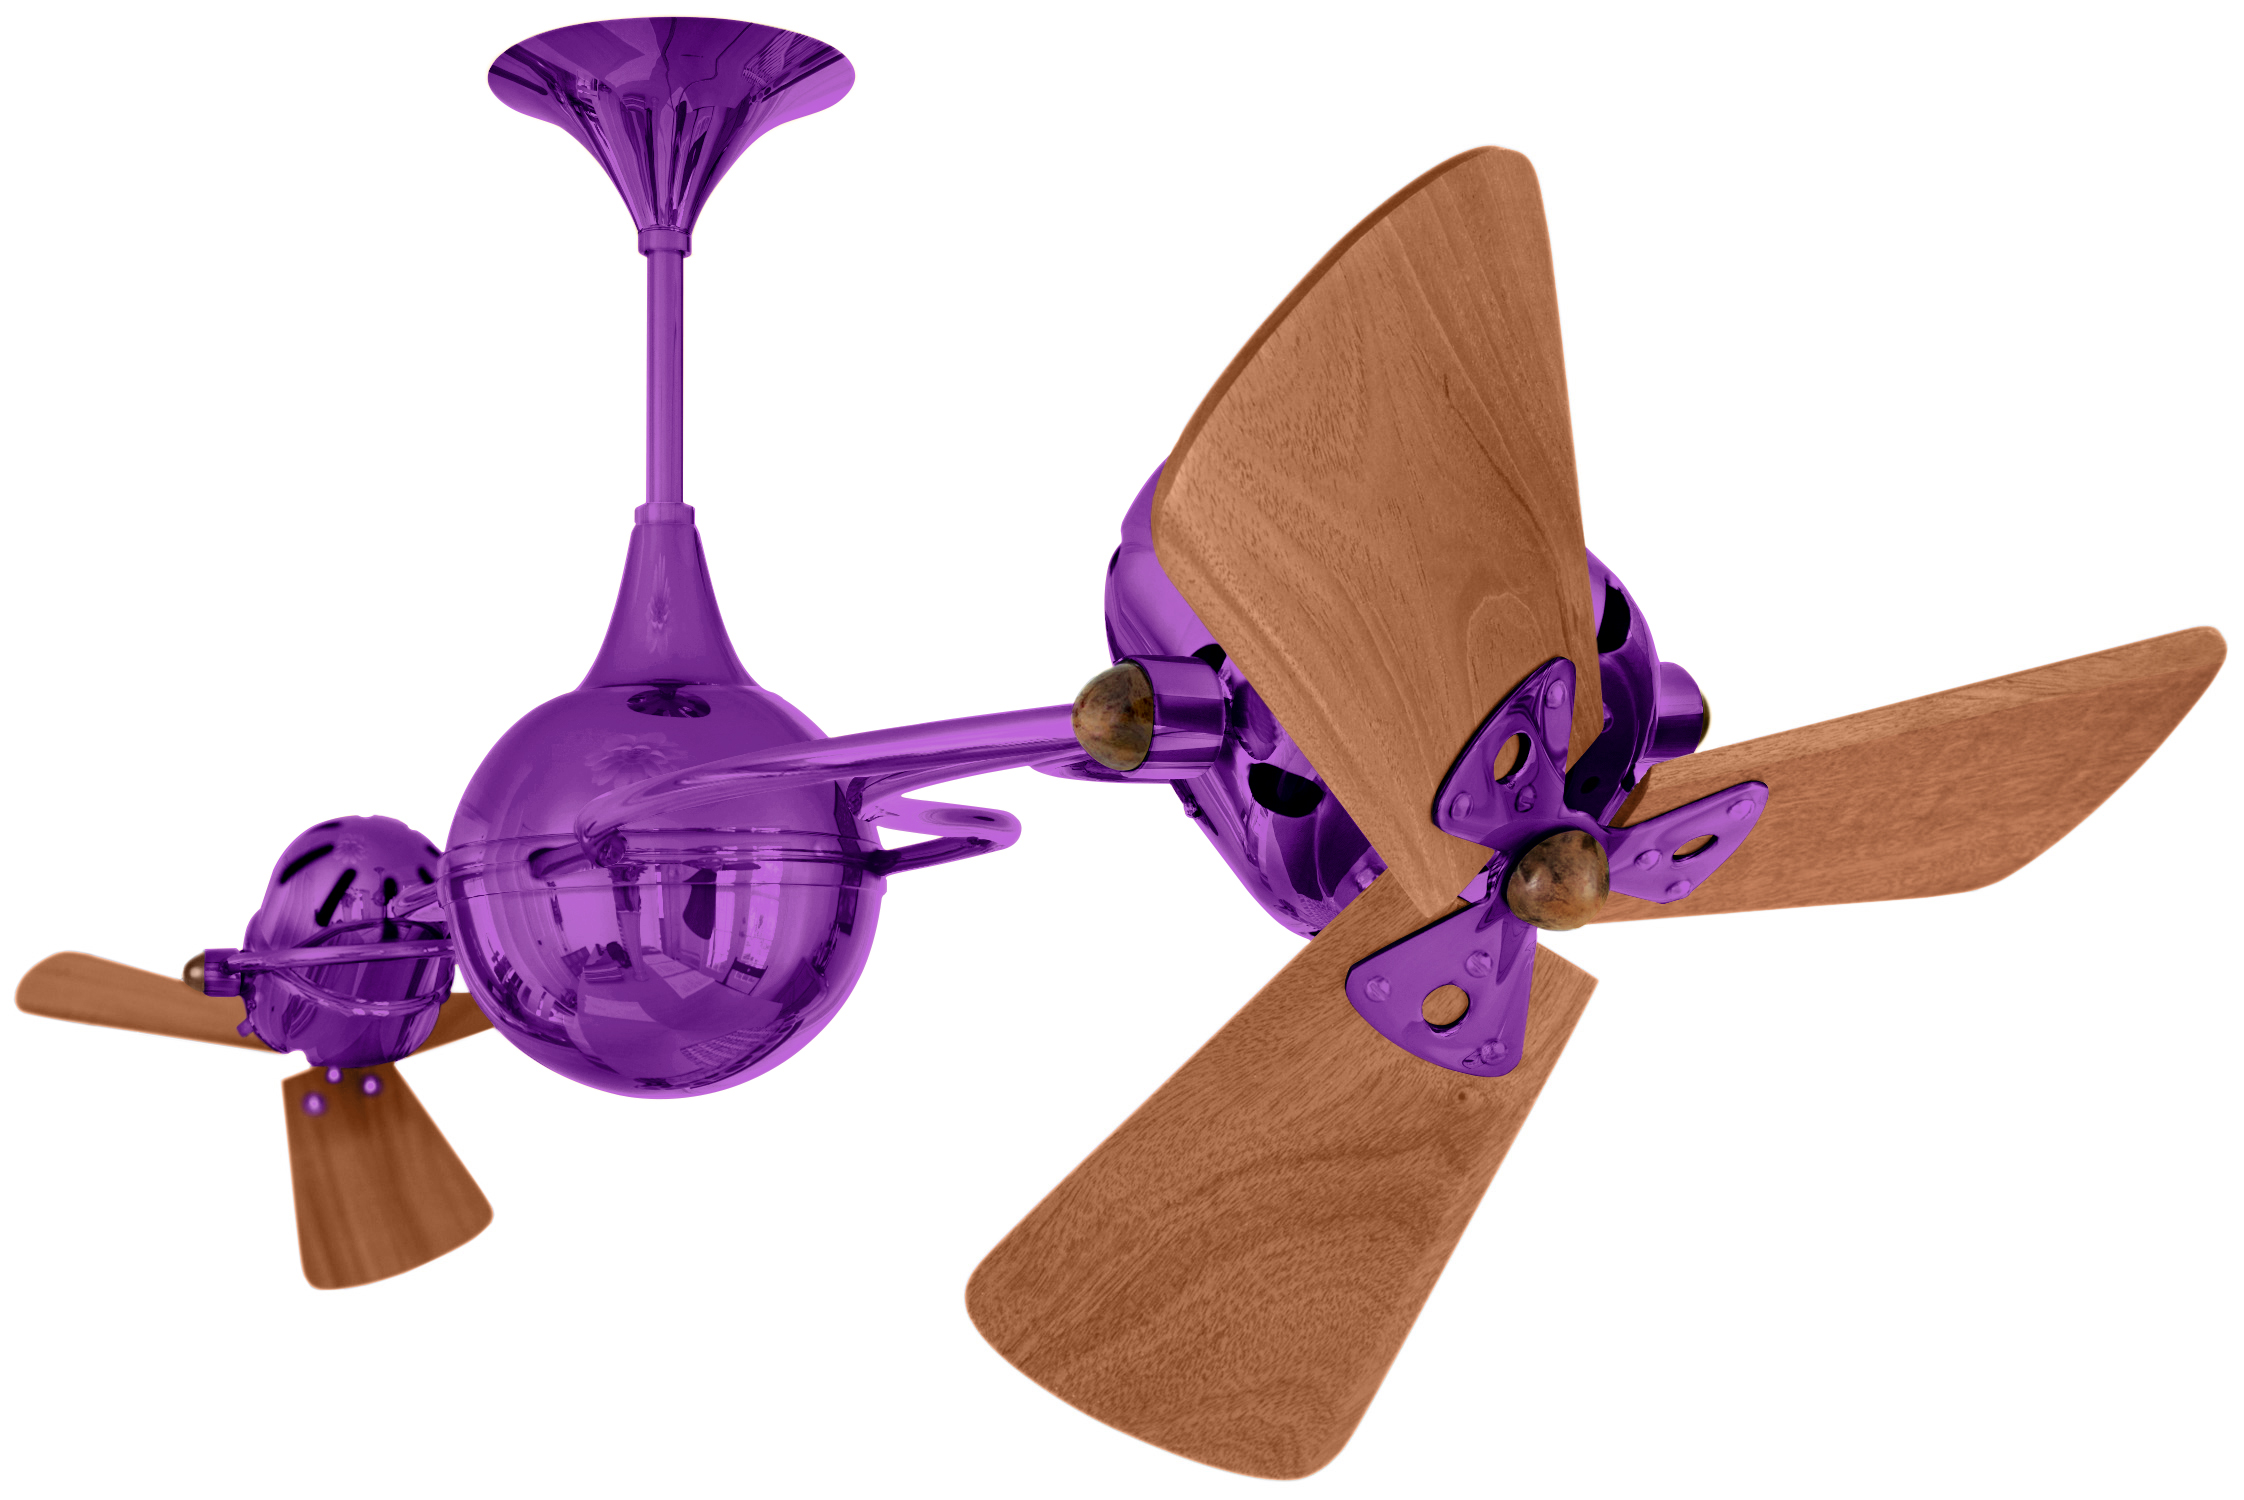 Italo Ventania rotational dual head ceiling fan in Light Purple / Ametista finish with solid mahogany wood blades made by Matthews Fan Company.